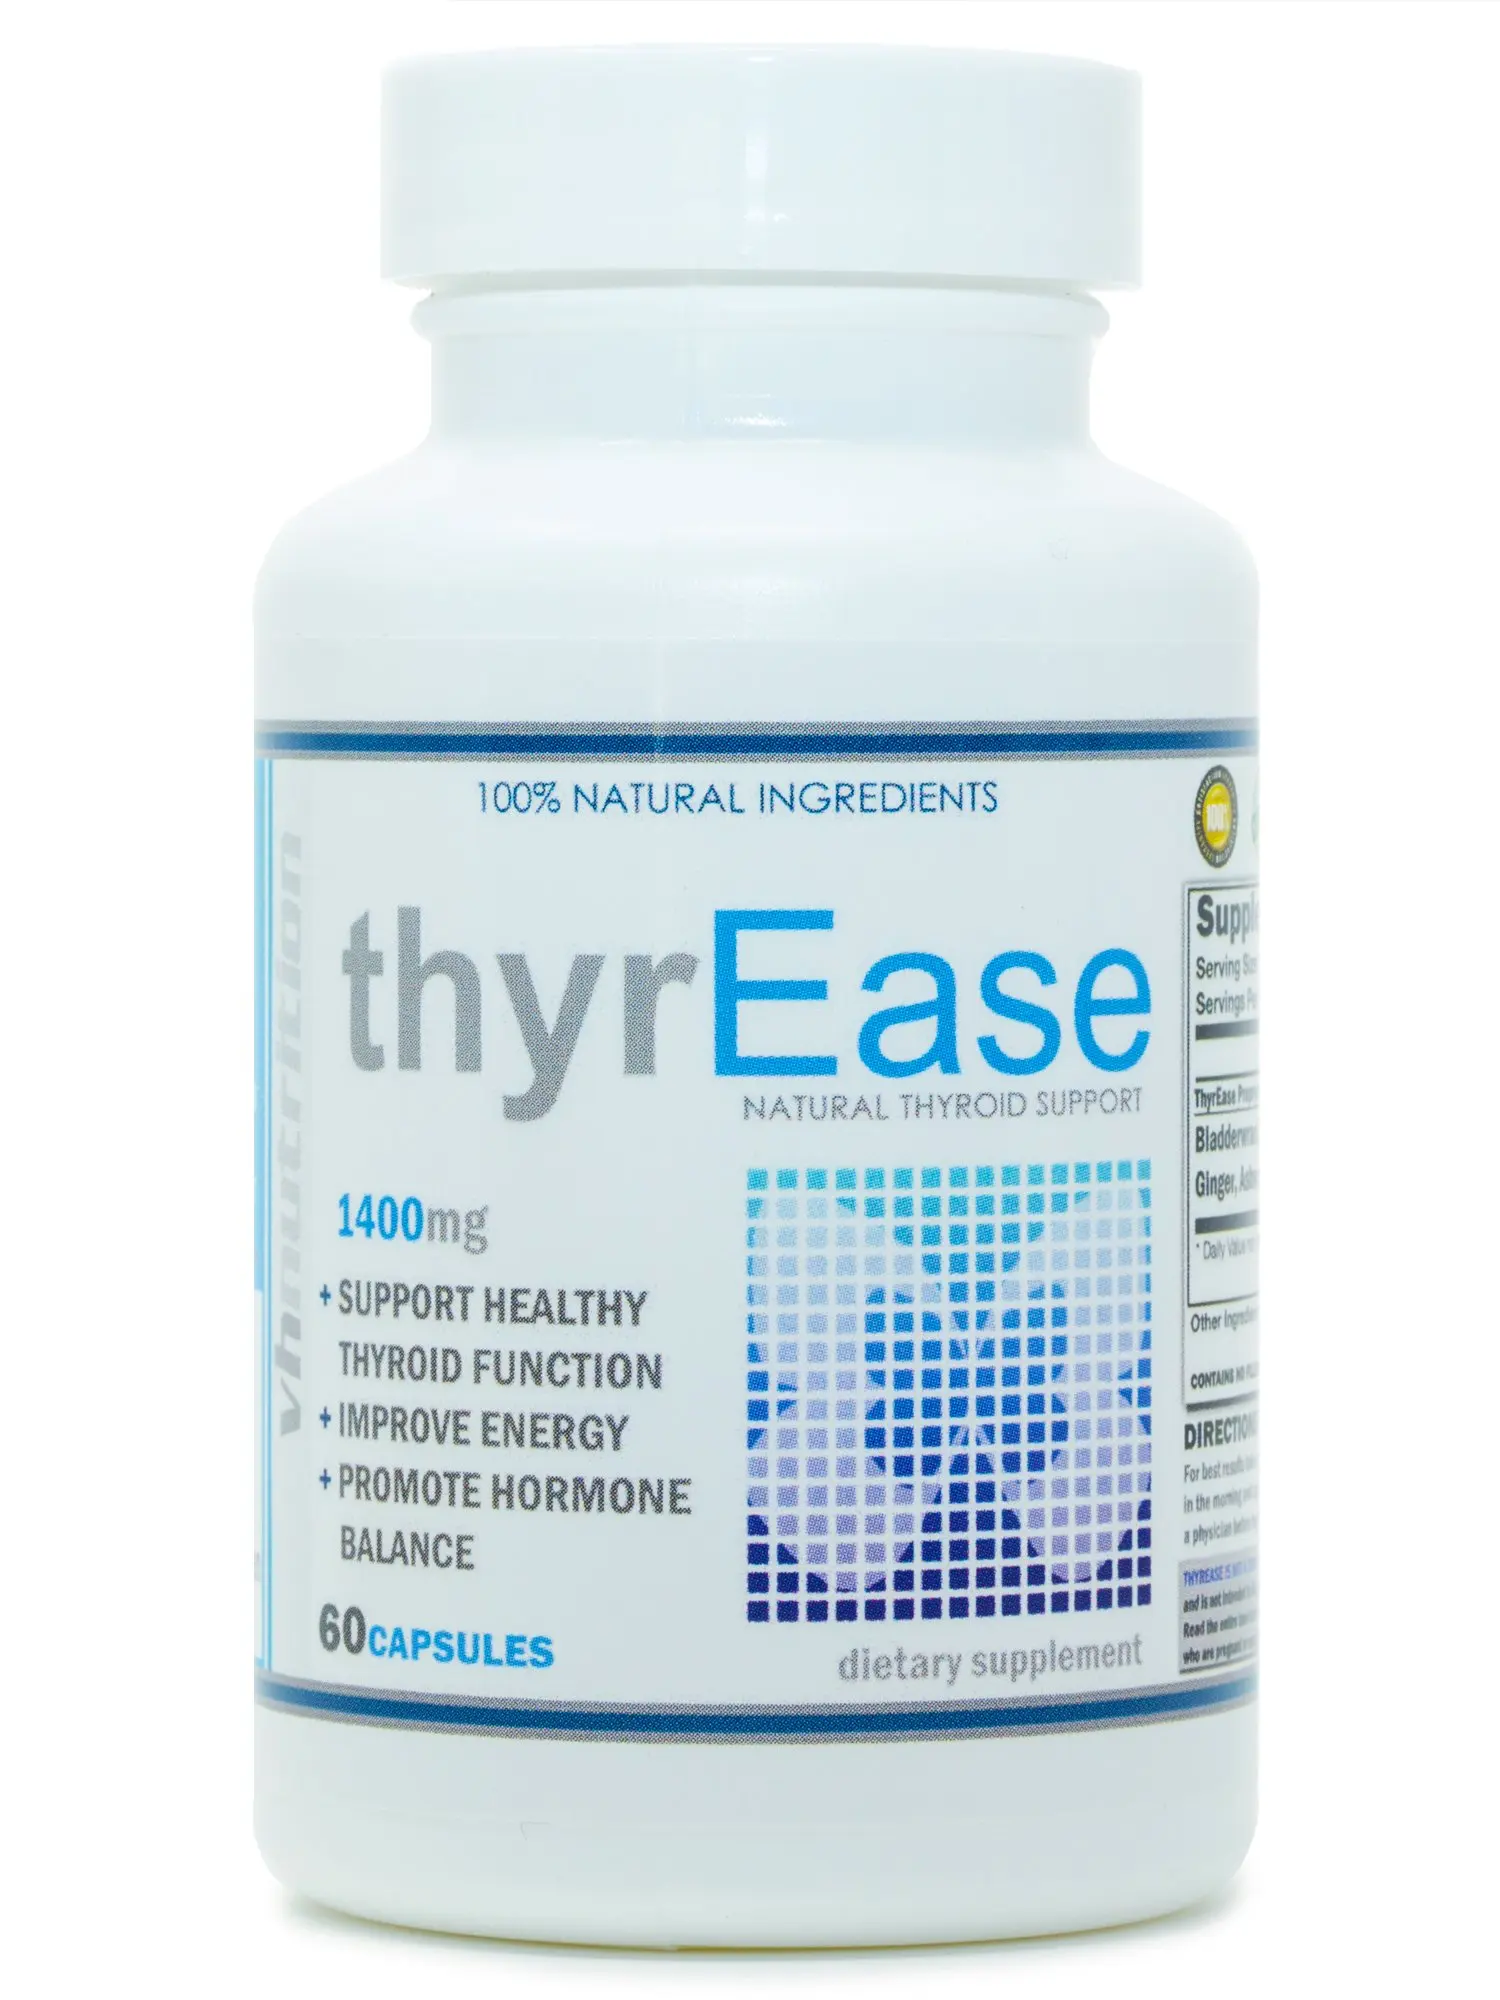 24.99. VH Nutrition ThyrEase Thyroid Support Supplement Complex with Iodine...